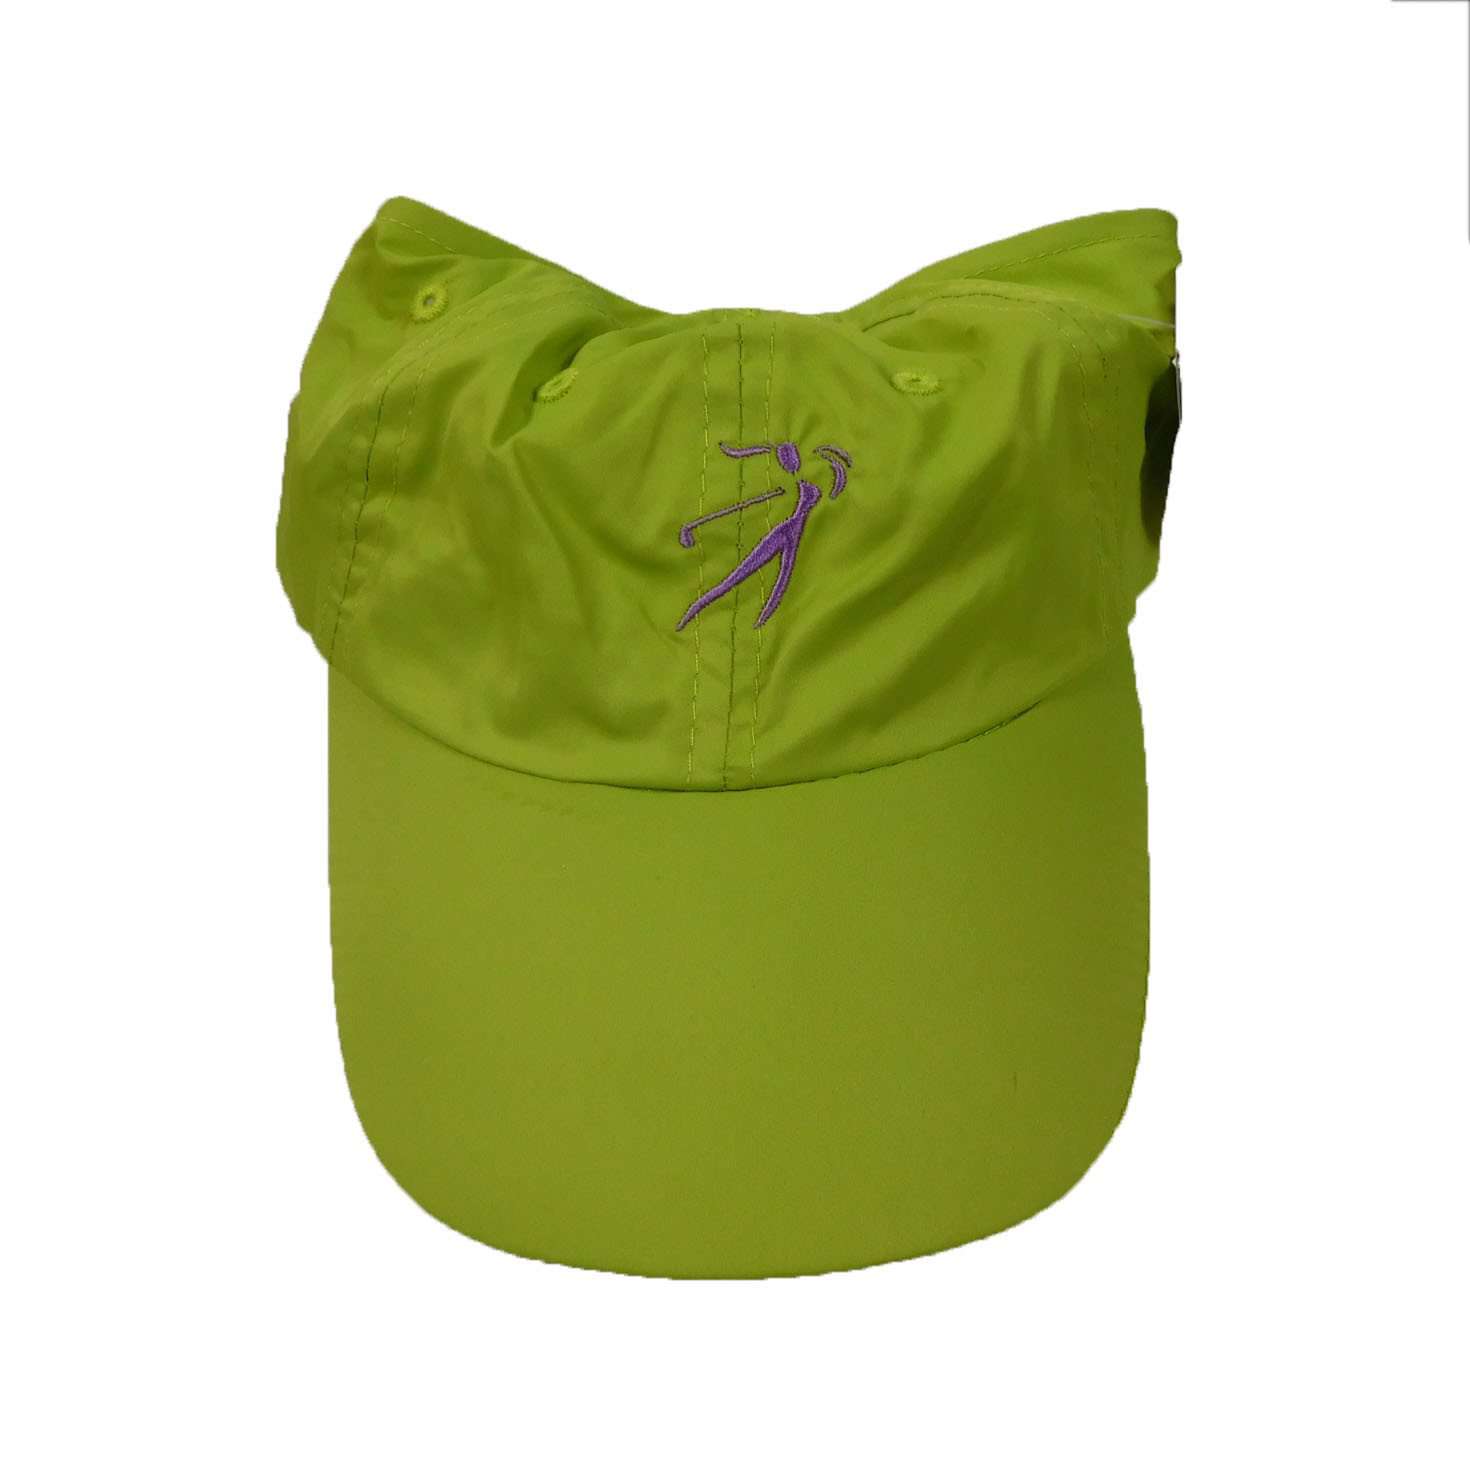 Ginnie Cap in Microfiber with Golf Logo Cap Great hats by Karen Keith WSMF603LM Lime  